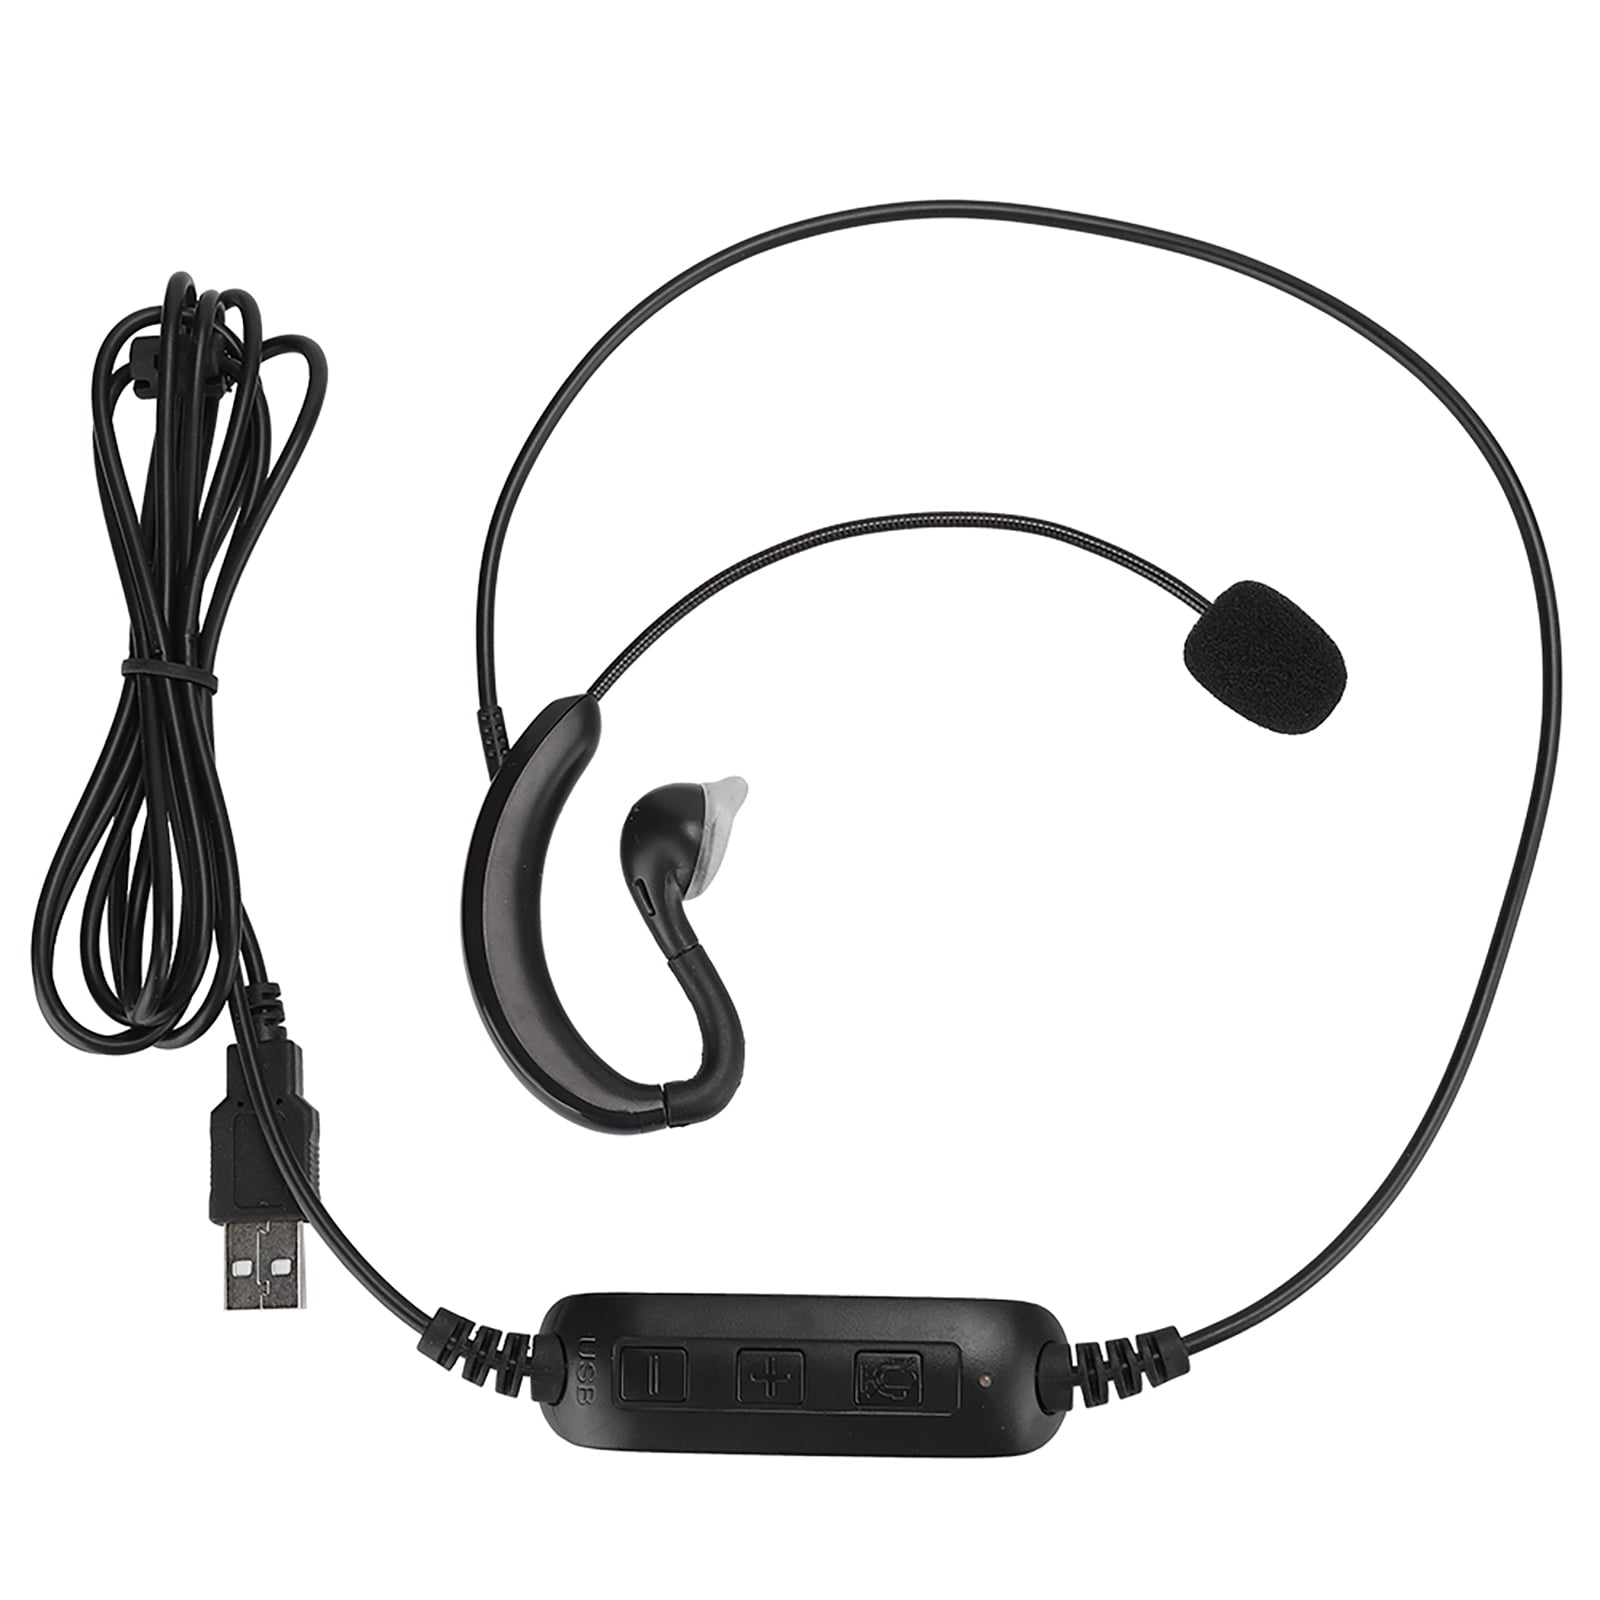 6ft Monaural Office Call Center Home Phone Headset Headphone w/RJ22 Cable Plug 